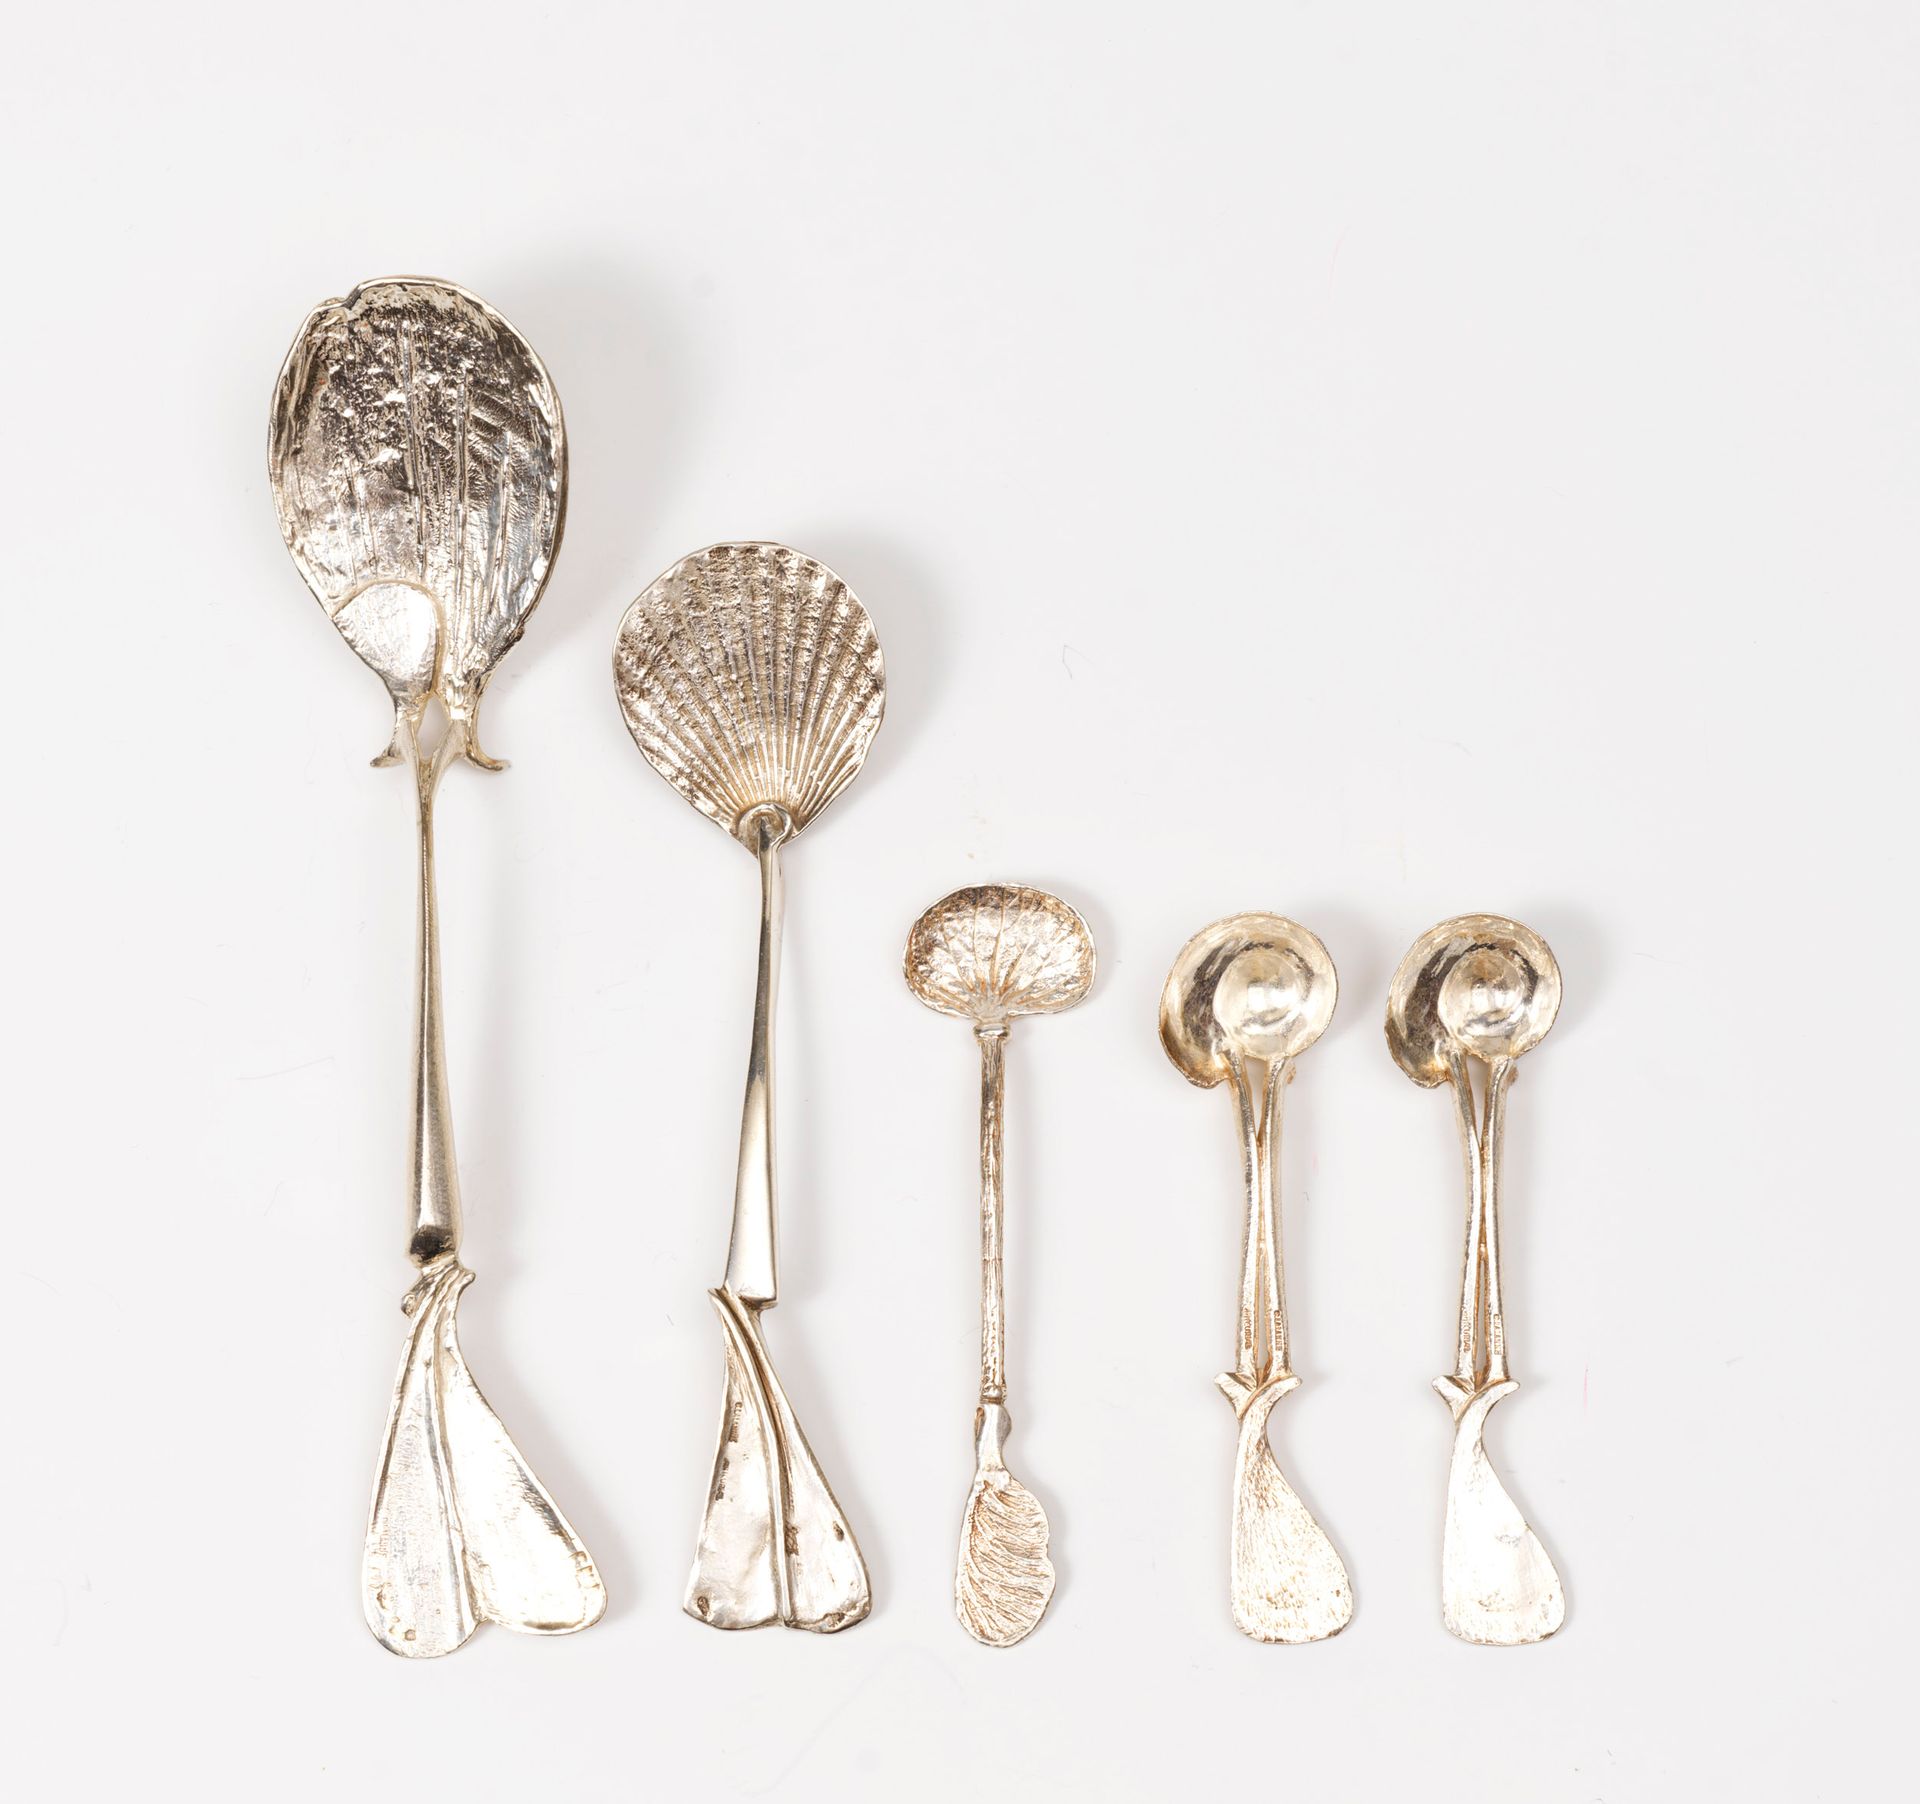 Claude LALANNE Claude LALANNE (1925-2019) Phagocythes cutlery including :一个大勺子，一&hellip;